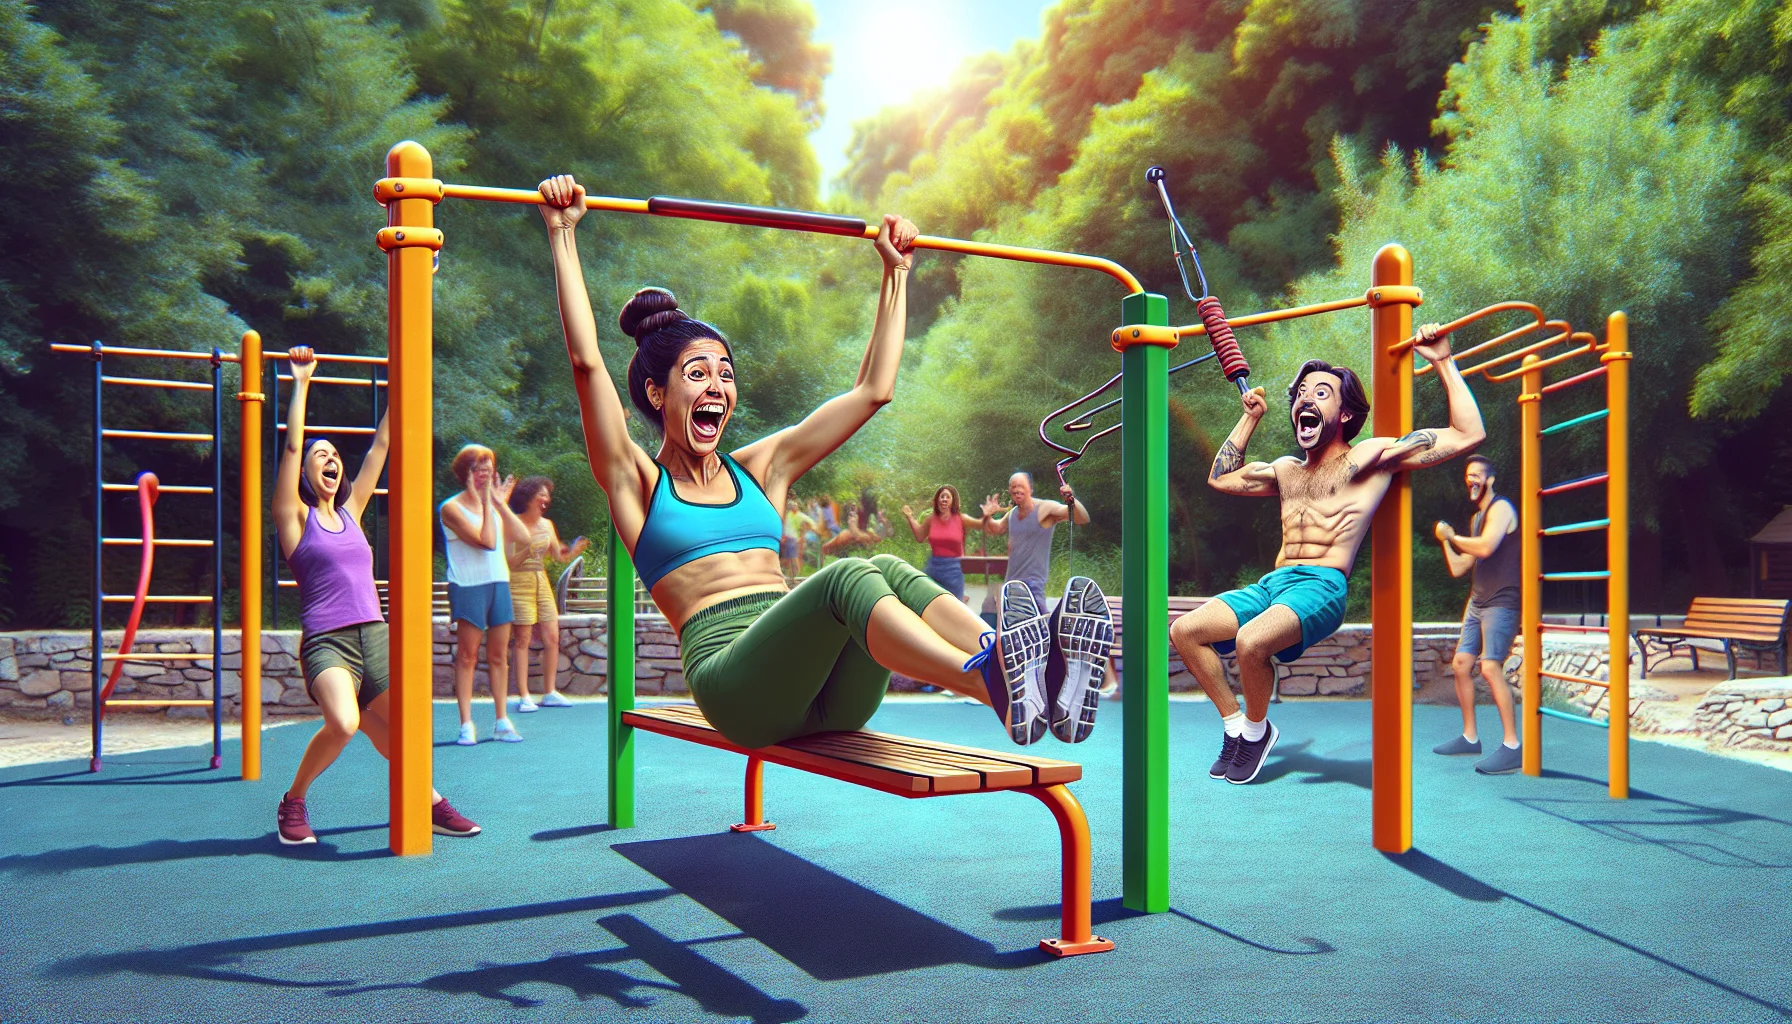 Paint an amusing scene promoting physical fitness. The setting is a well-equipped outdoor gym in a lush park on a bright sunny day. In the forefront, a Hispanic woman with her brunette hair tied up in a bun is doing an impressive set of calisthenic ABS exercises on a brightly colored horizontal bar, she is laughing while in perfect form. In the background, Caucasian man attempting to mimic her move on other bars, but tangled up in a comical and safe manner. A group of diverse onlookers react with a mix of amusement and motivation, inspiring them to join the fitness fun.